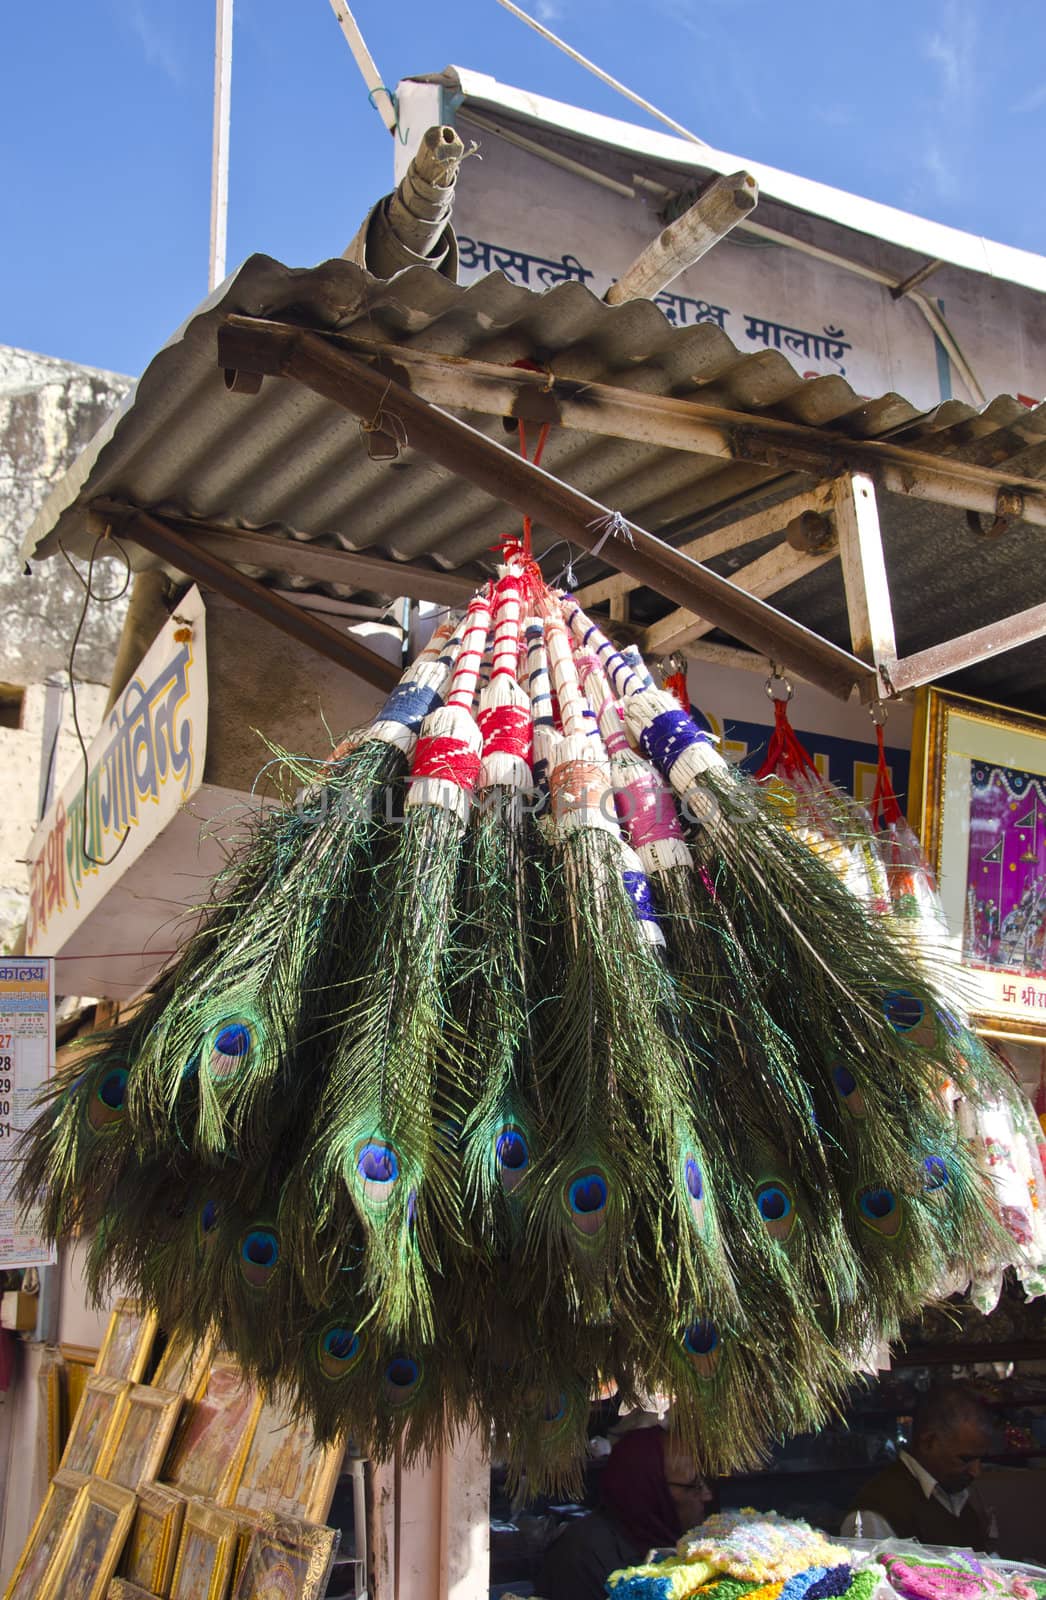 peacock feathers in India market, Jaipur city